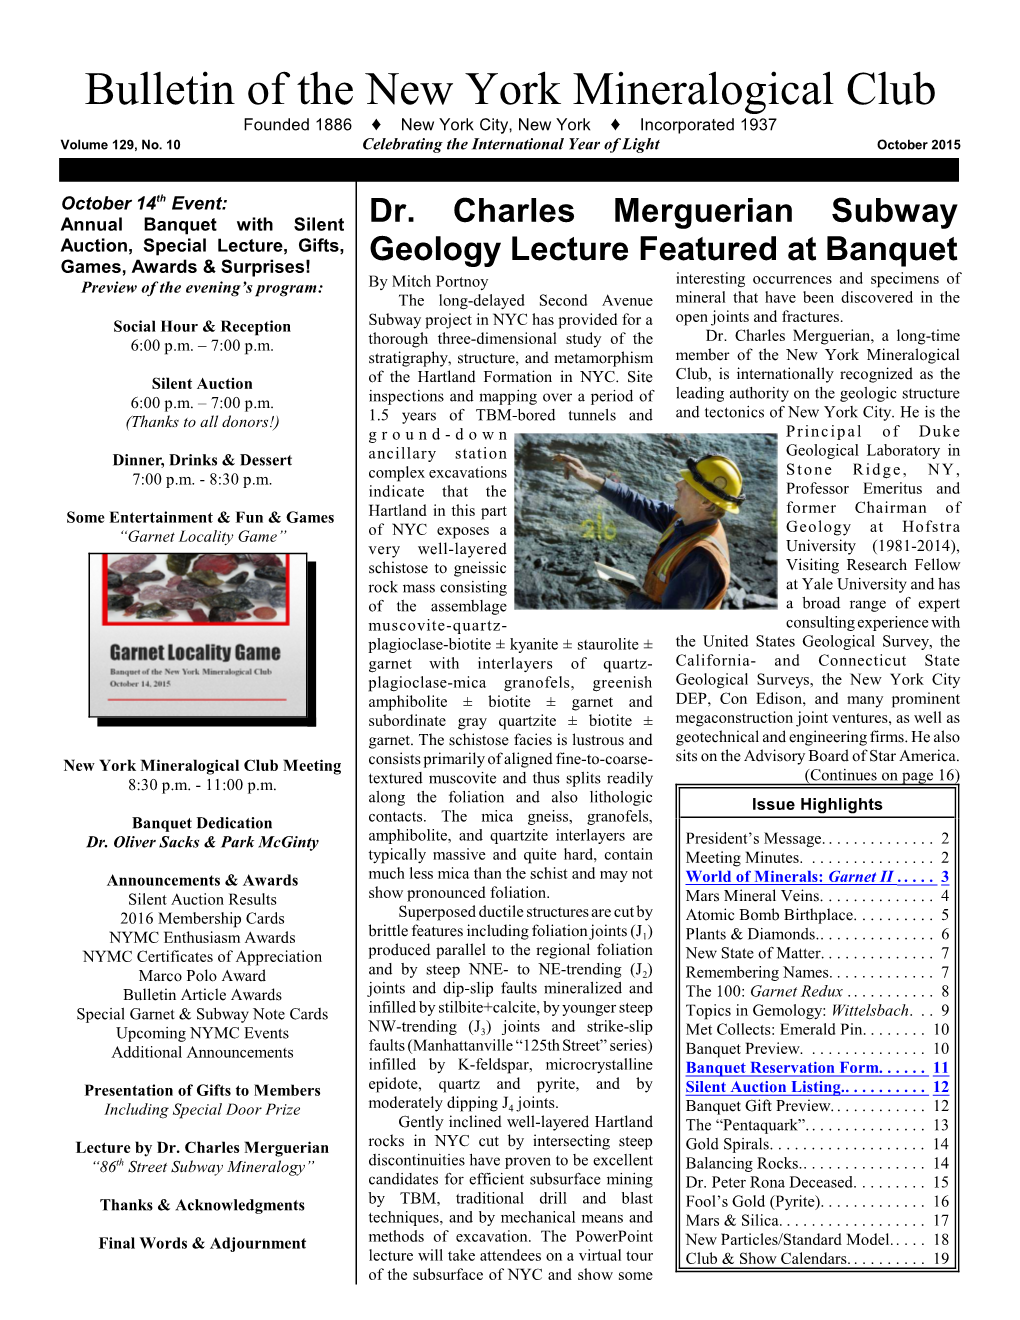 October 2015 Bulletin of the New York Mineralogical Club 3